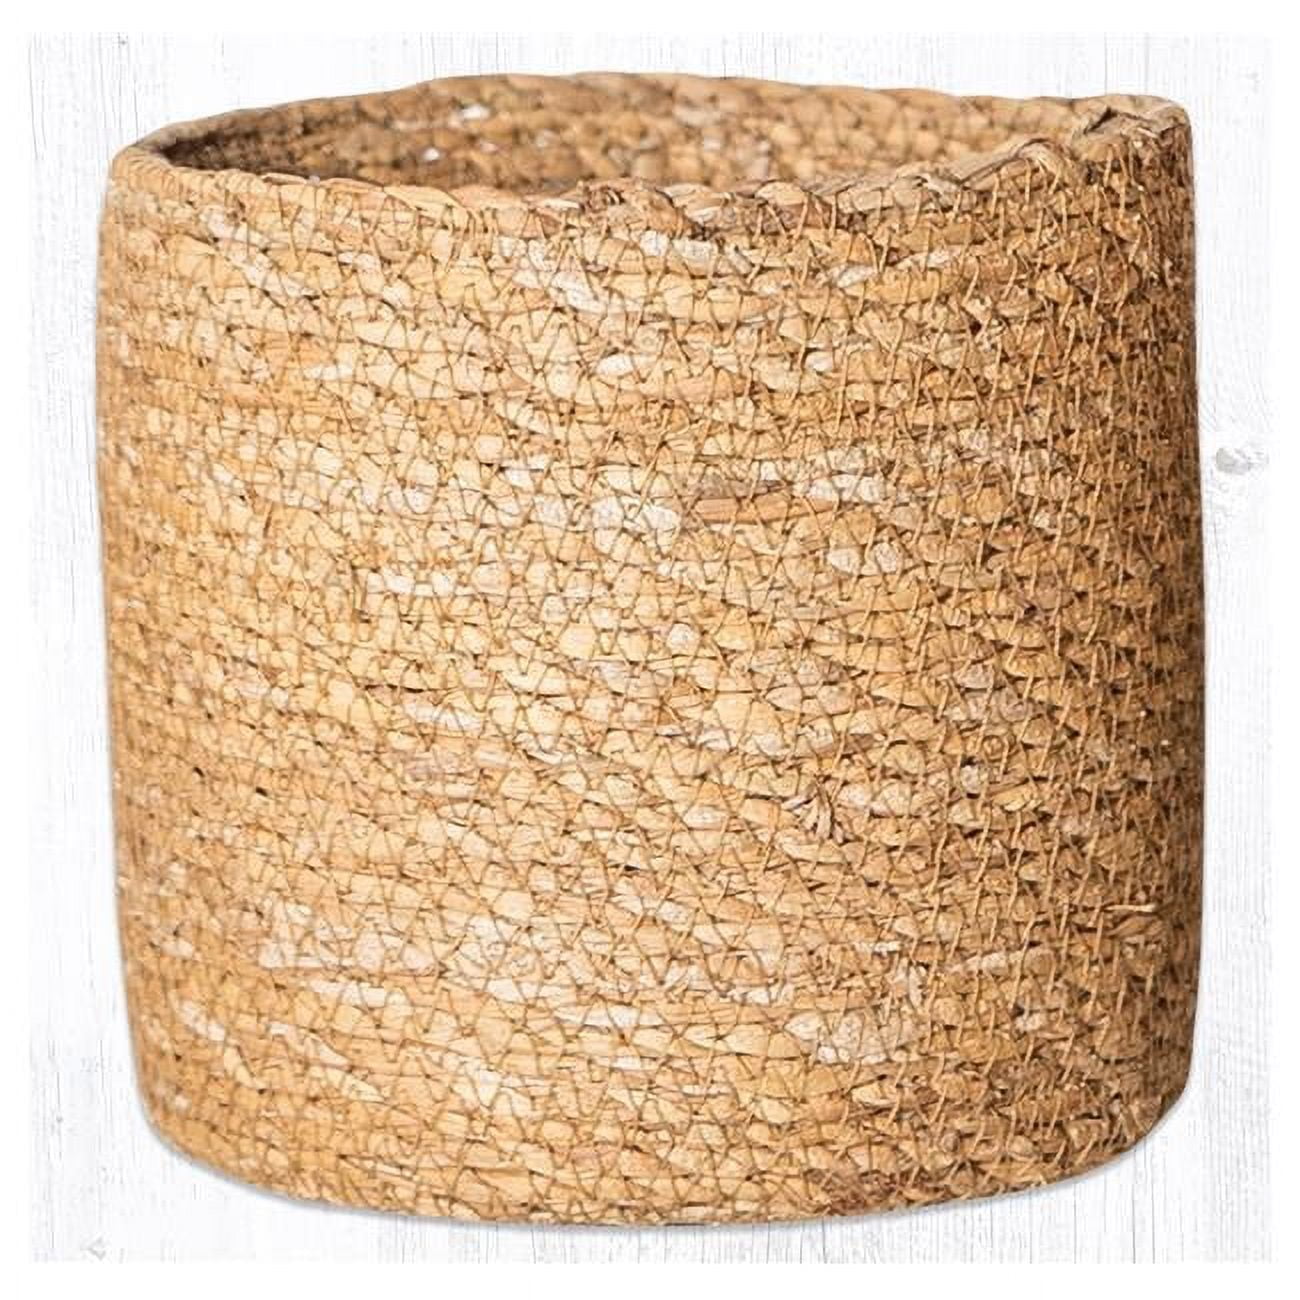 Picture of Capitol Importing 37-SGBSM001 5.5 x 5.5 in. SGB-01 Natural Sedge Grass Basket